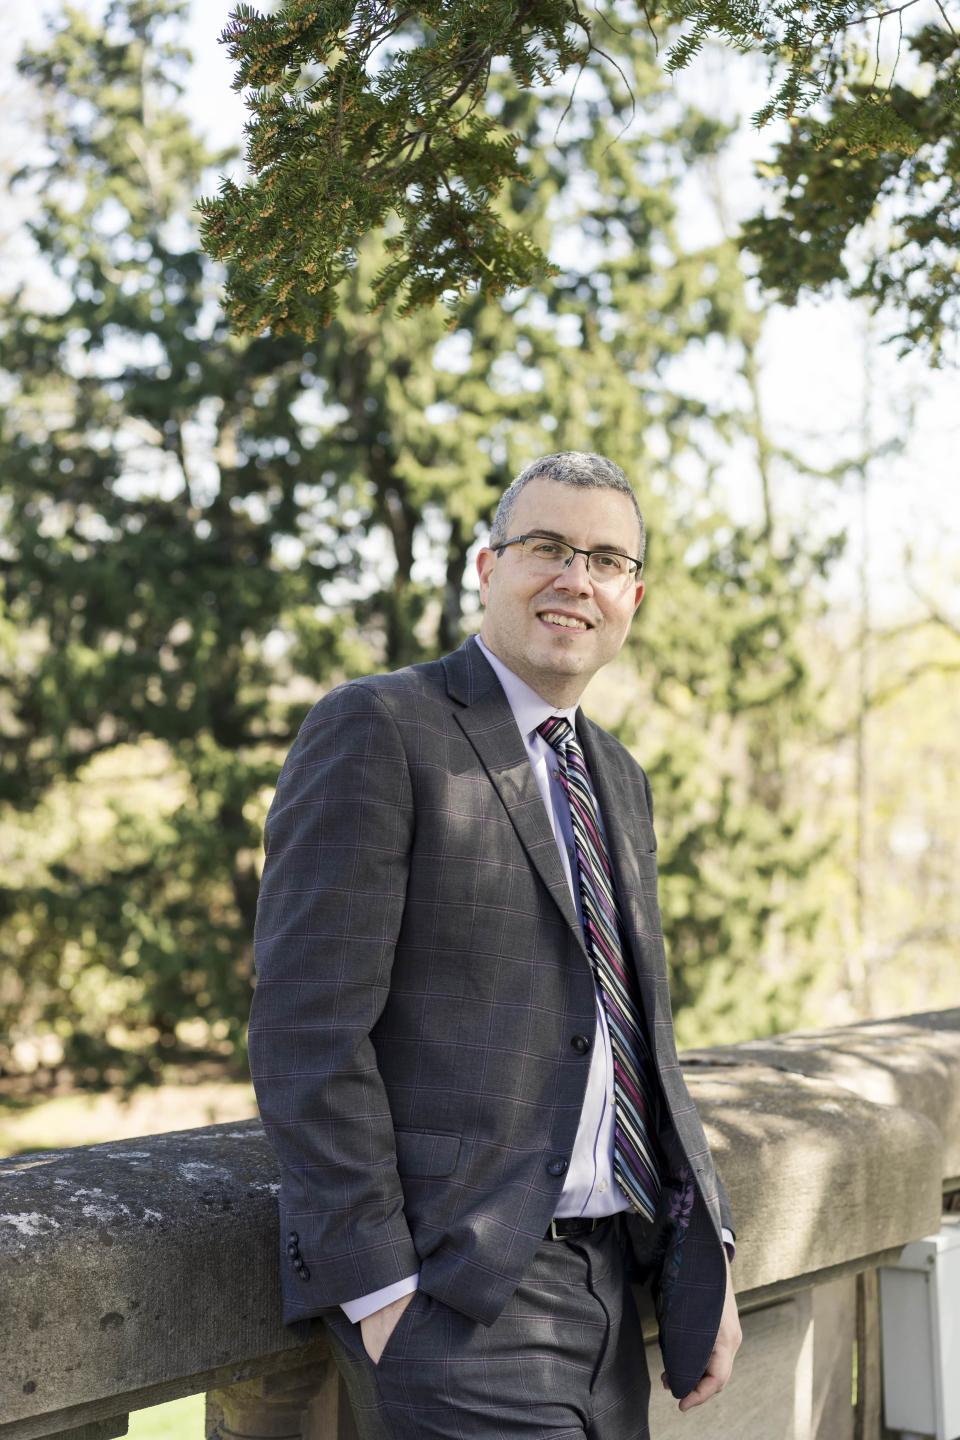 The Fairleigh Dickinson University board of trustees appointed longtime FDU faculty member and administrator Michael J. Avaltroni as the university's ninth president on April 26, 2023.